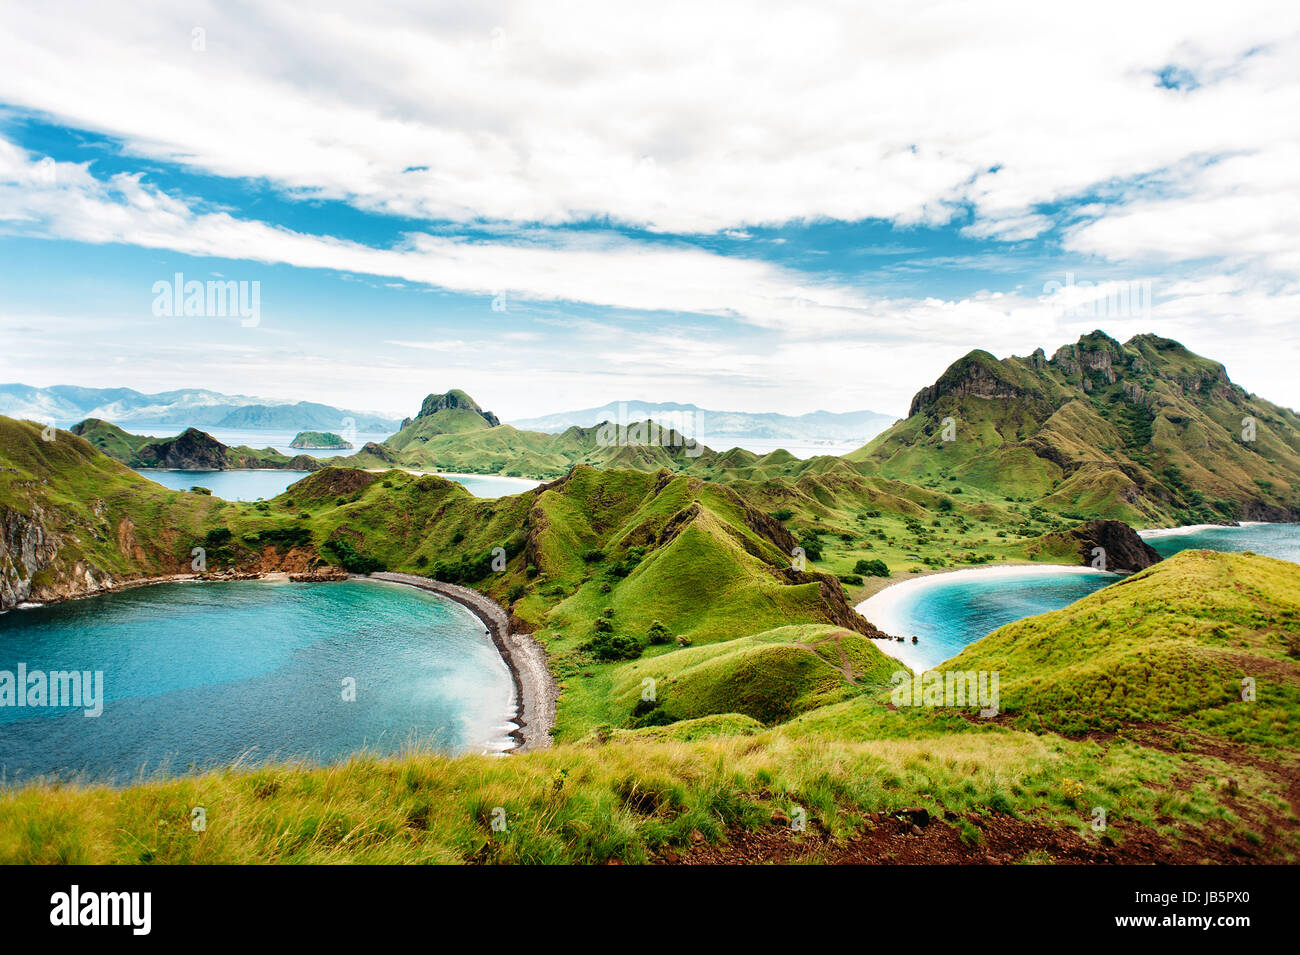 Padar Island, Komodo National Park in East Nusa Tenggara, Indonesia. Amazing marine seascape with mountains and rocks. Blue sky with clouds. Stock Photo